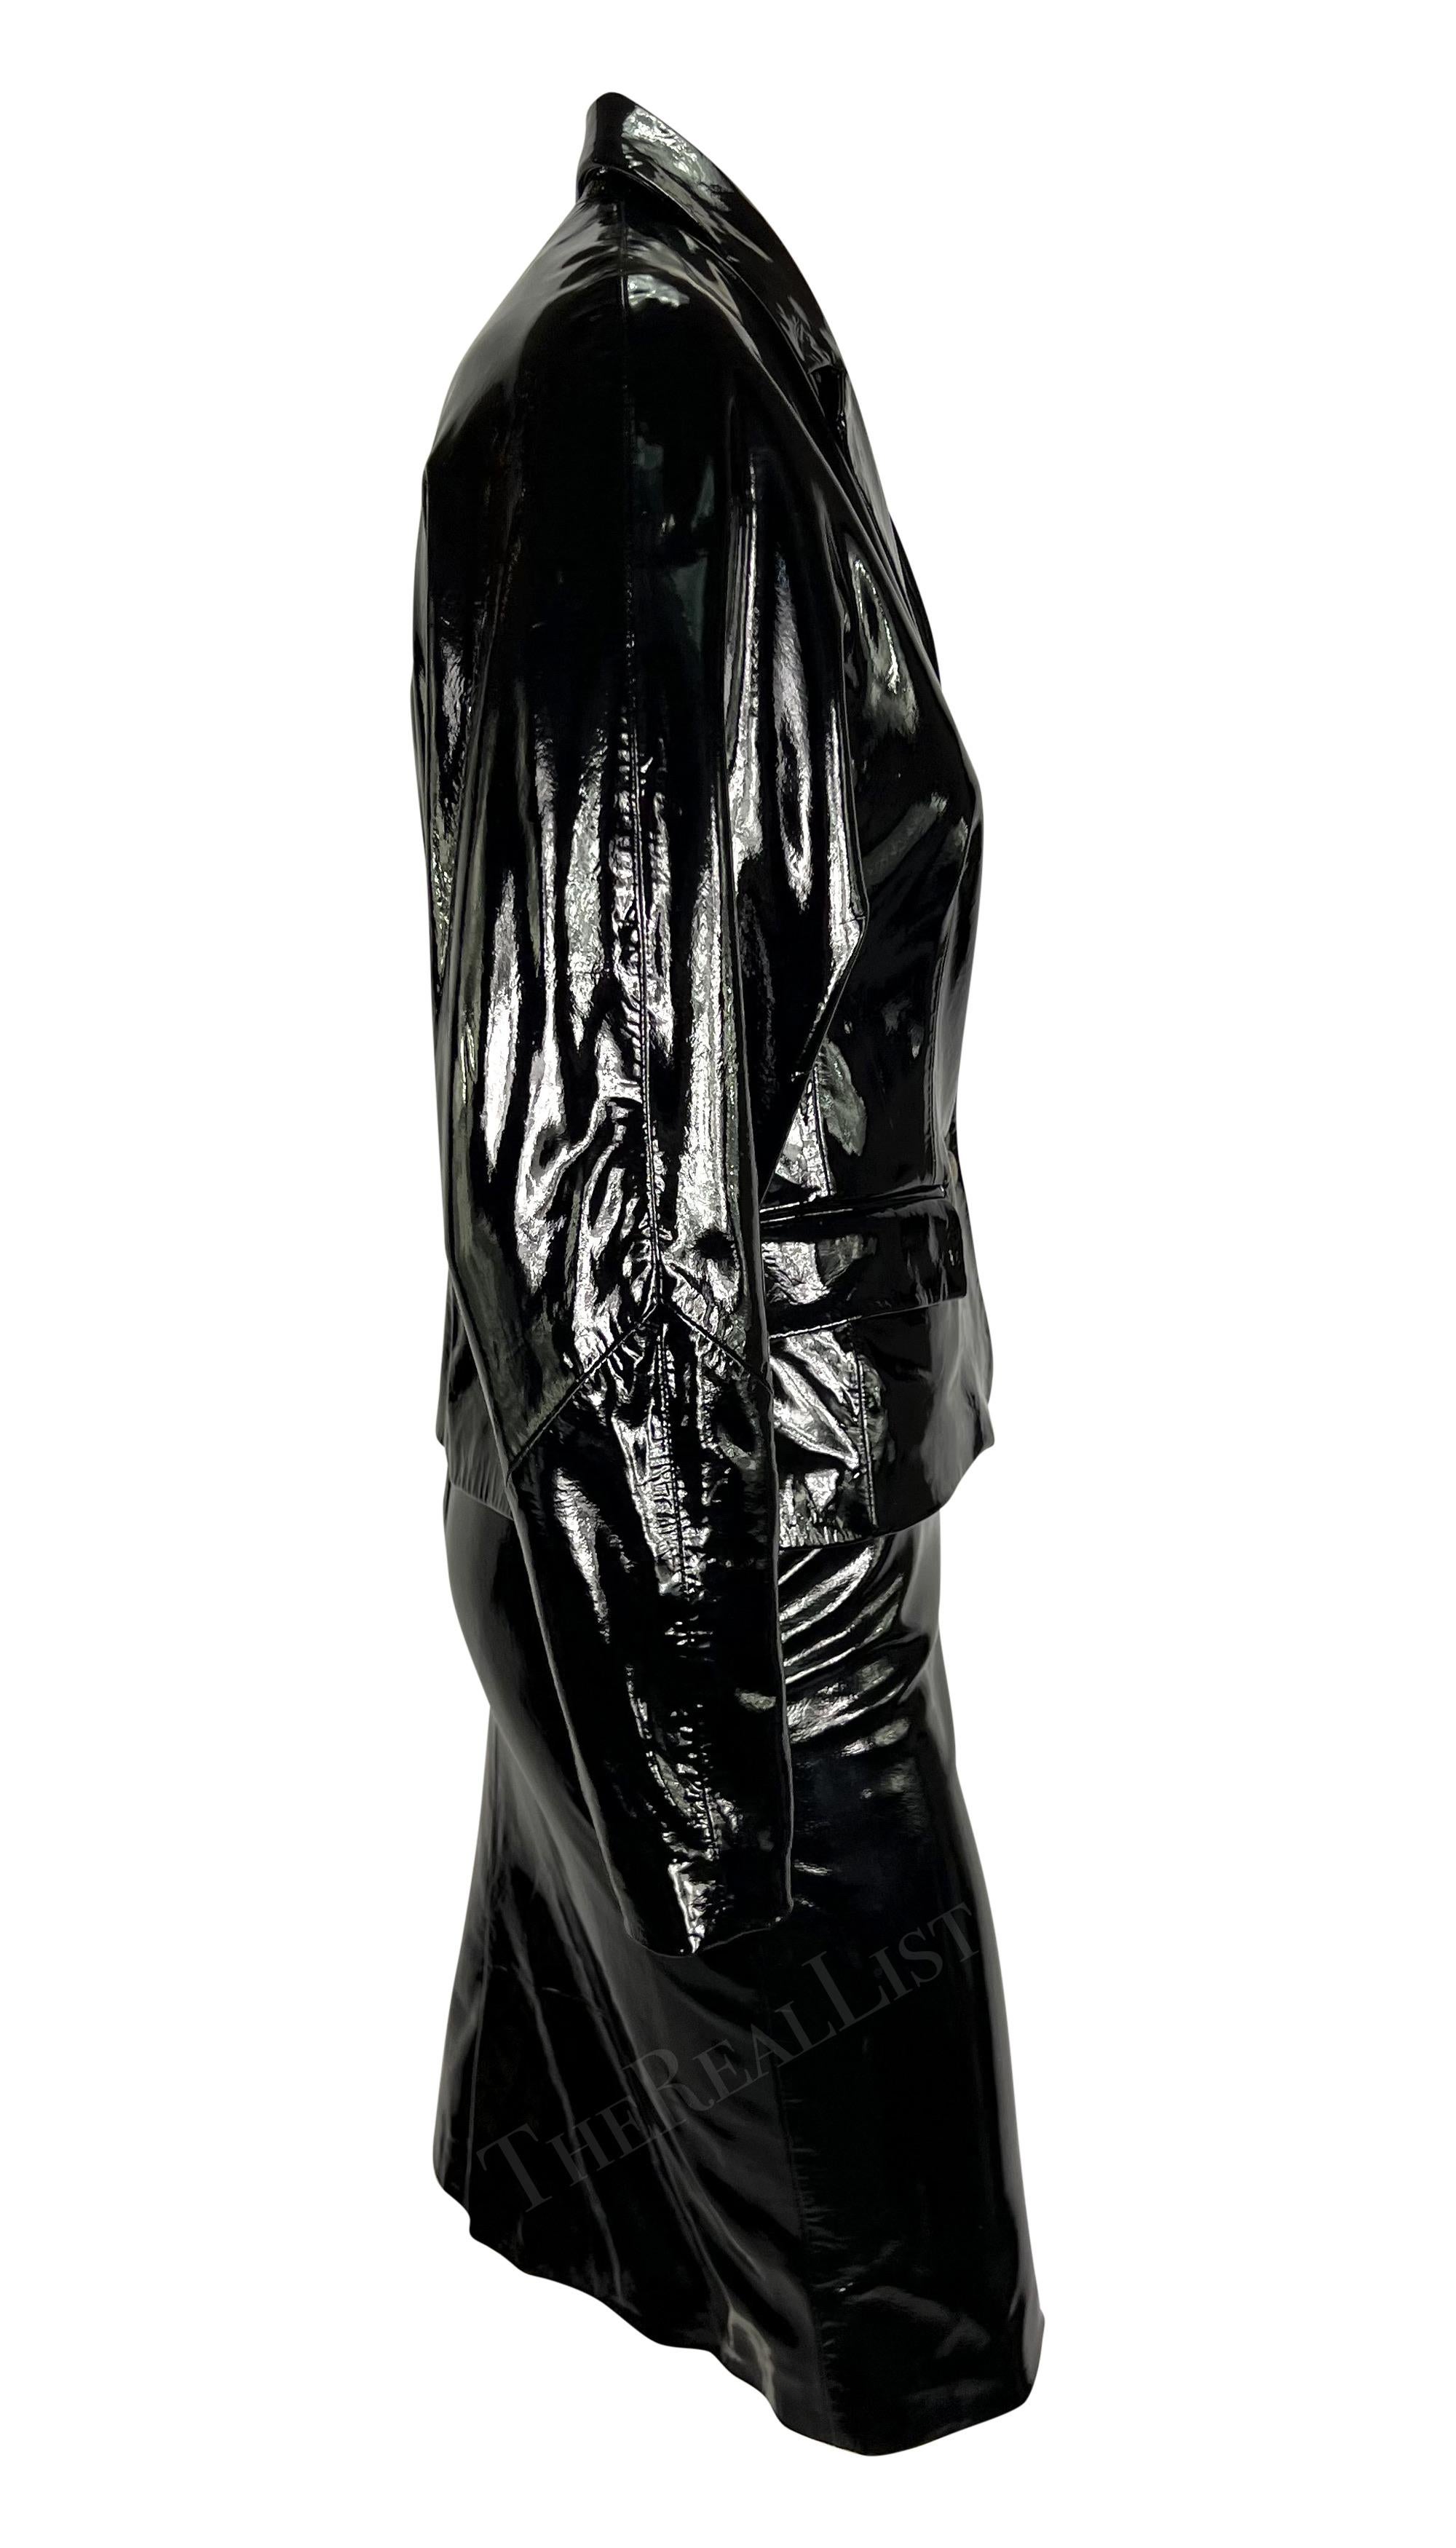 S/S 2001 Gianni Versace by Dontella Runway Black Patent Leather Moto Skirt Suit  7